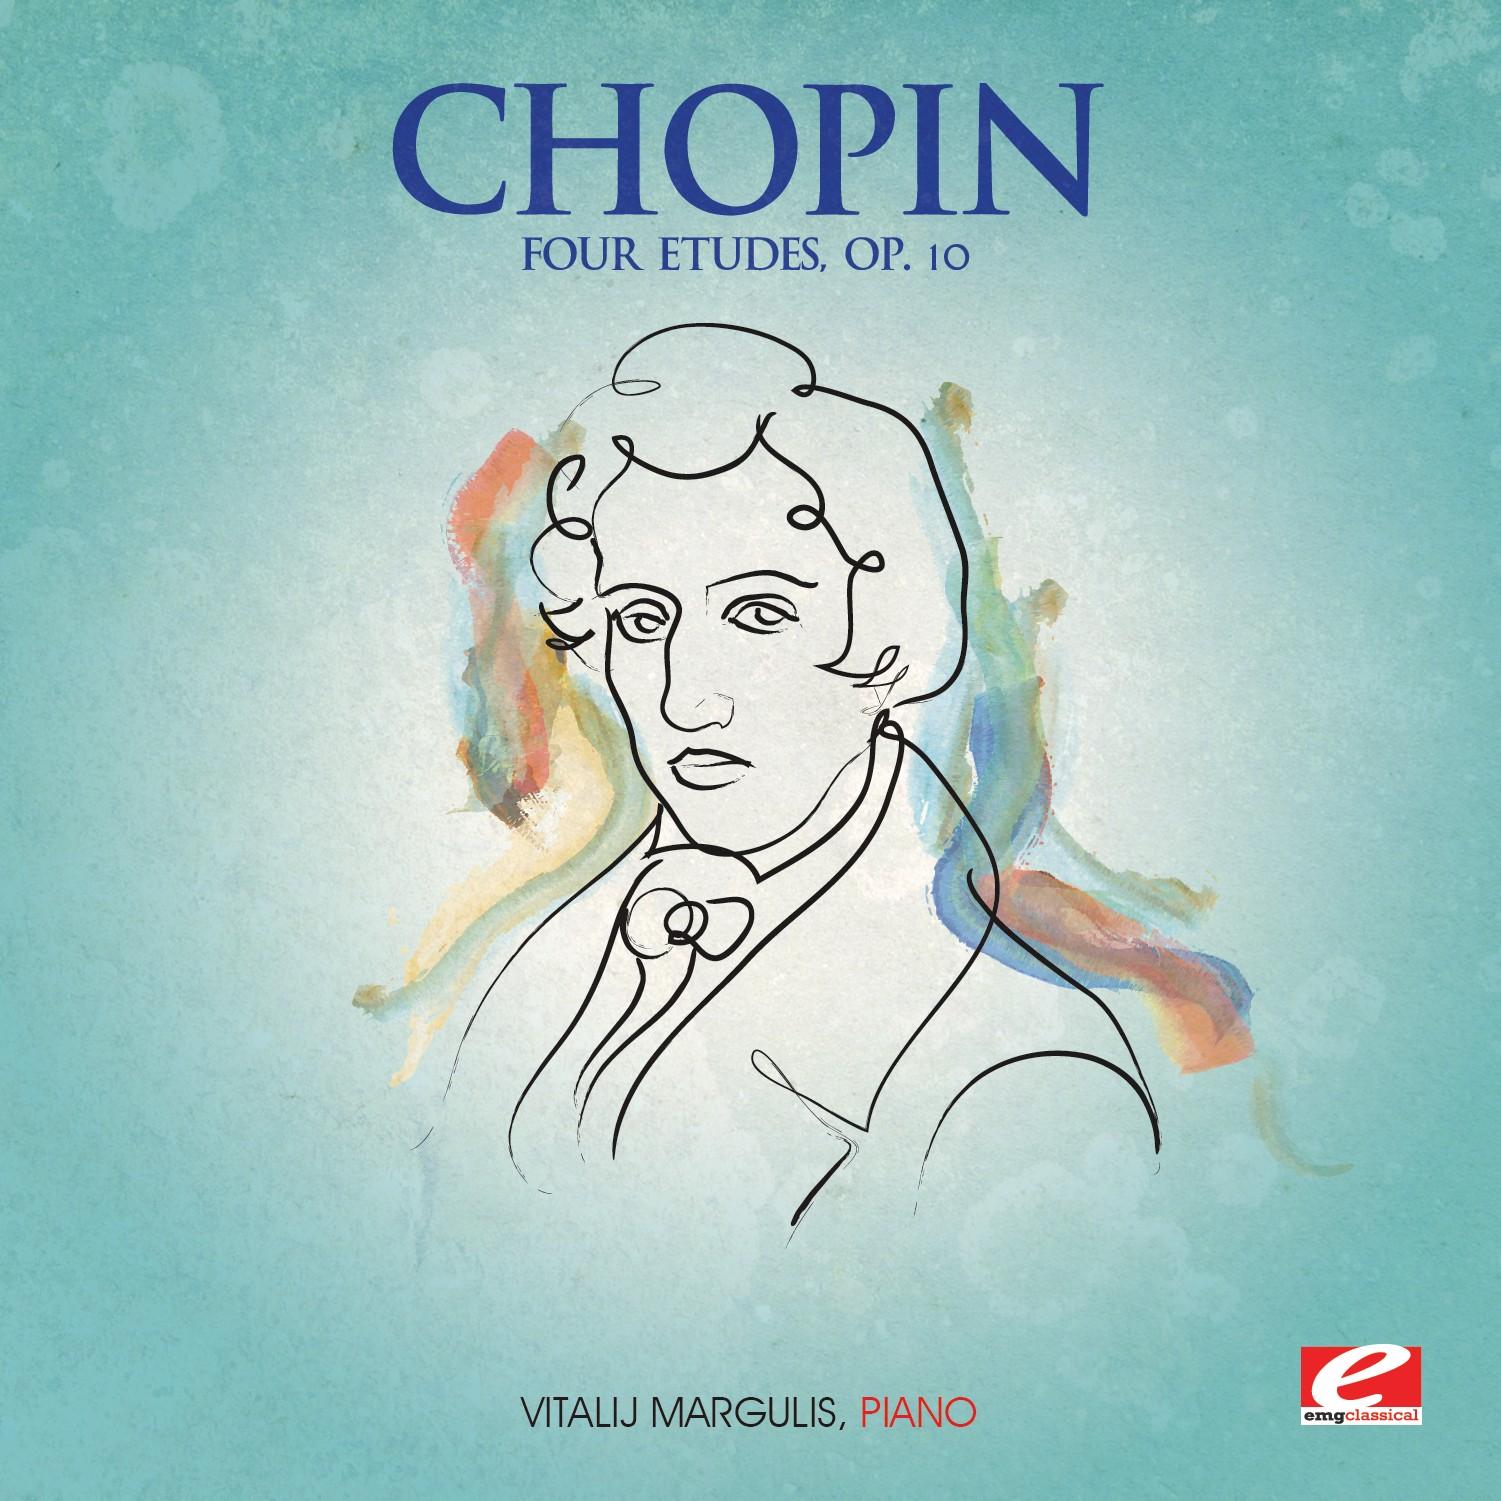 Chopin: Four Etudes, Op. 10 (Digitally Remastered)